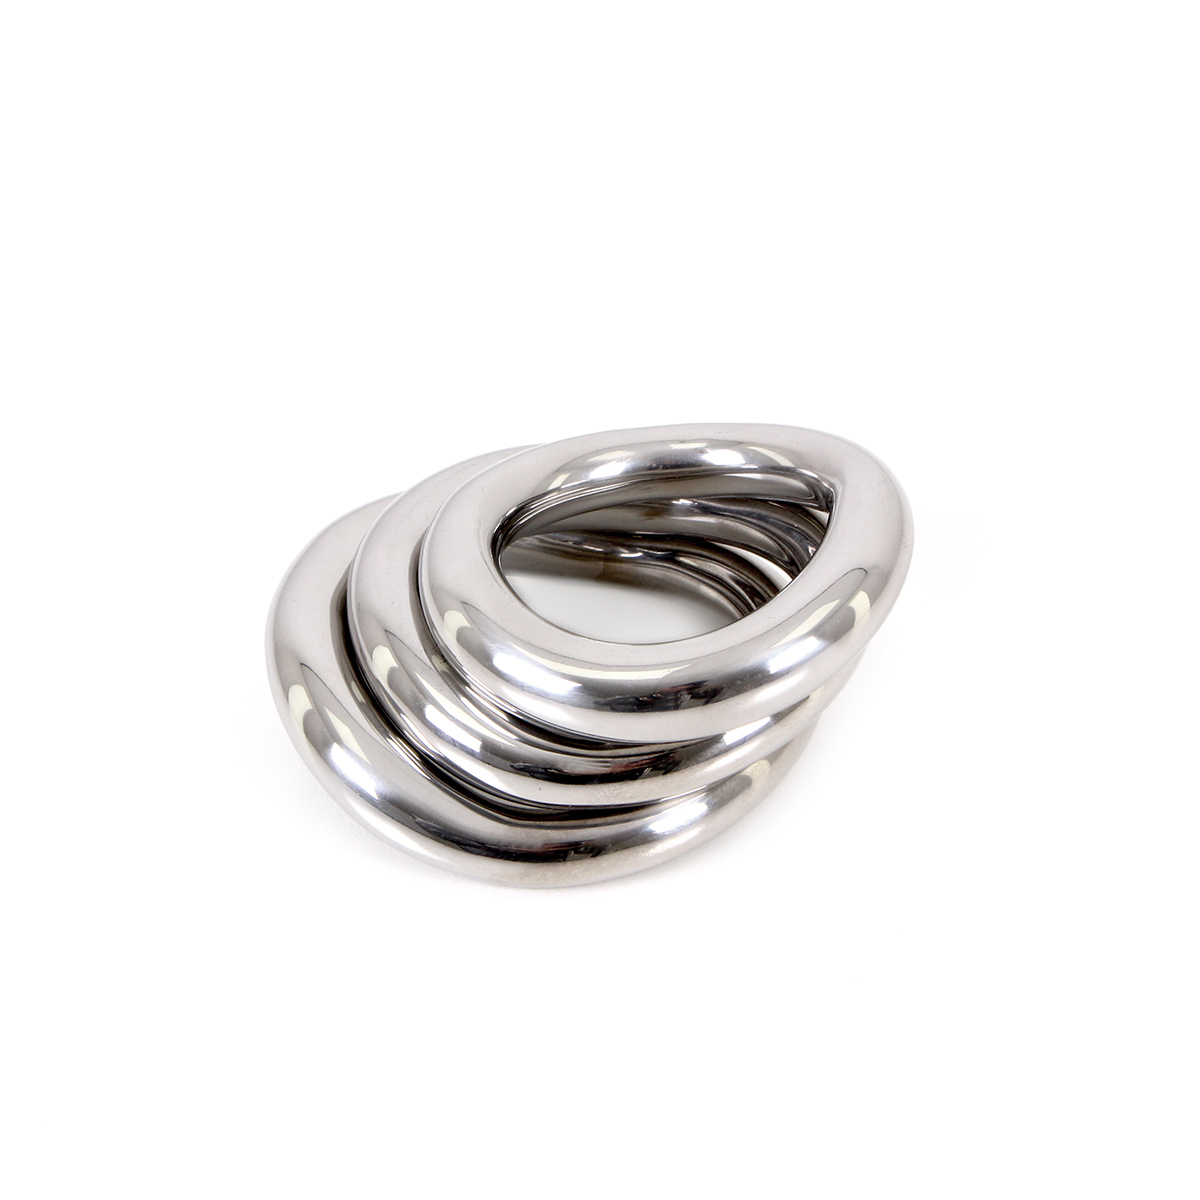 Costum-Fit-Cockring-50-mm-OPR-277046-5